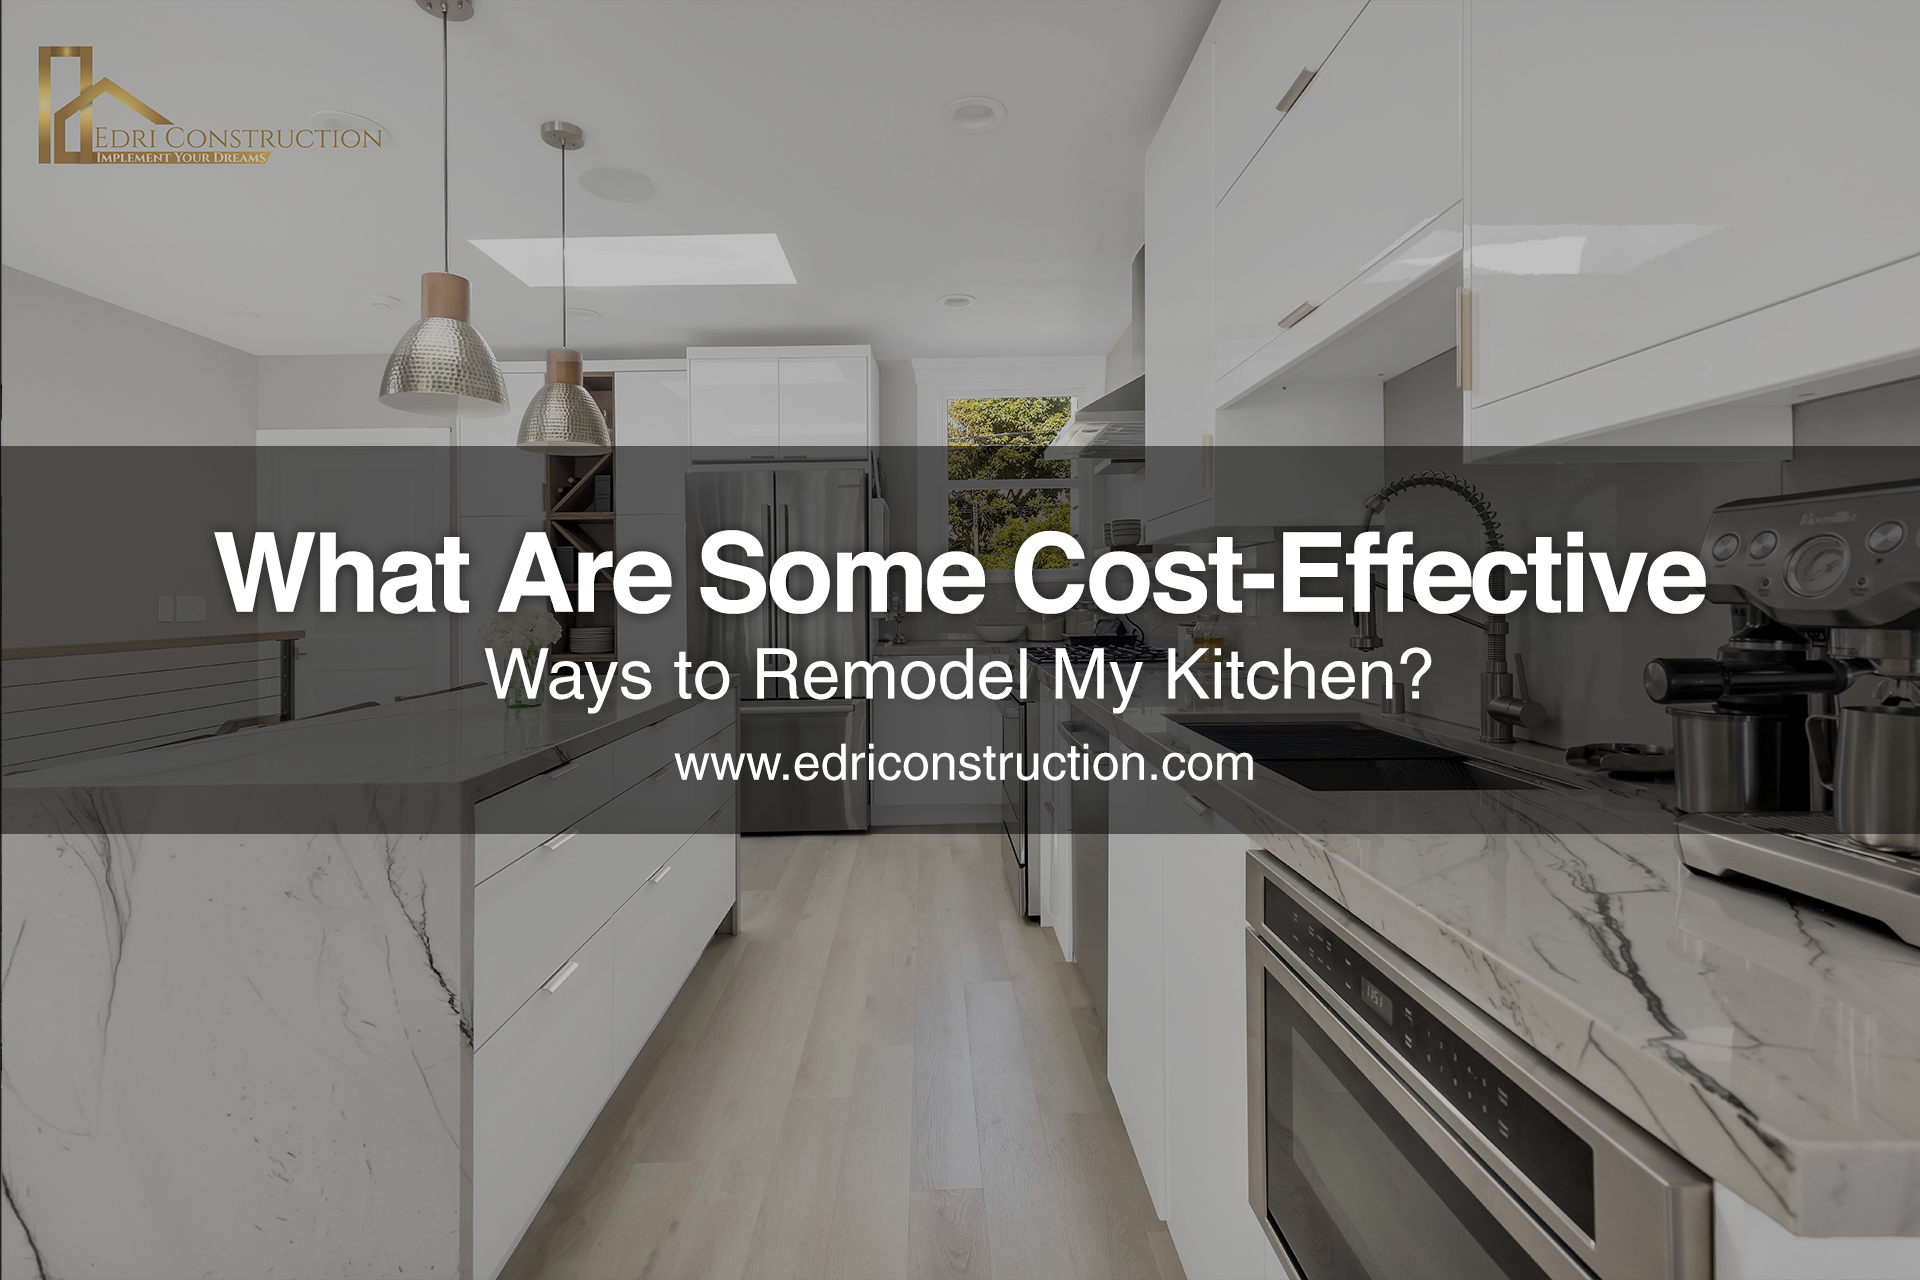 Cost-Effective Ways to Remodel My Kitchen | Edri Construction